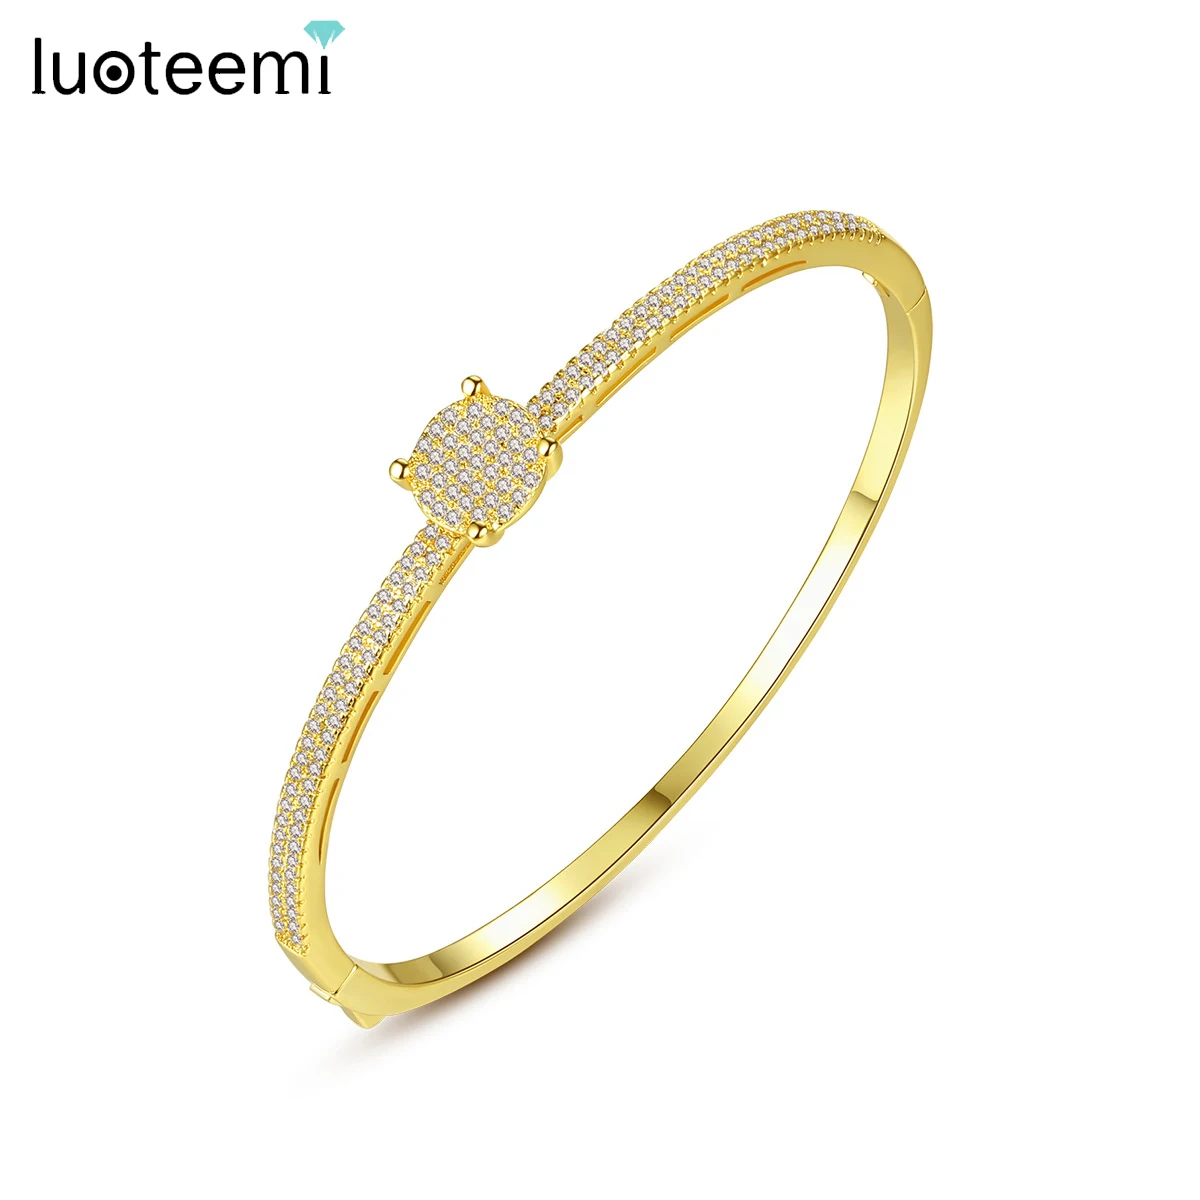 

LUOTEEMI New Design White Gold or Gold Color Bangles for Women Weeding Party Paved Micro Shiny CZ Fashion Jewelry Gifts Bijoux